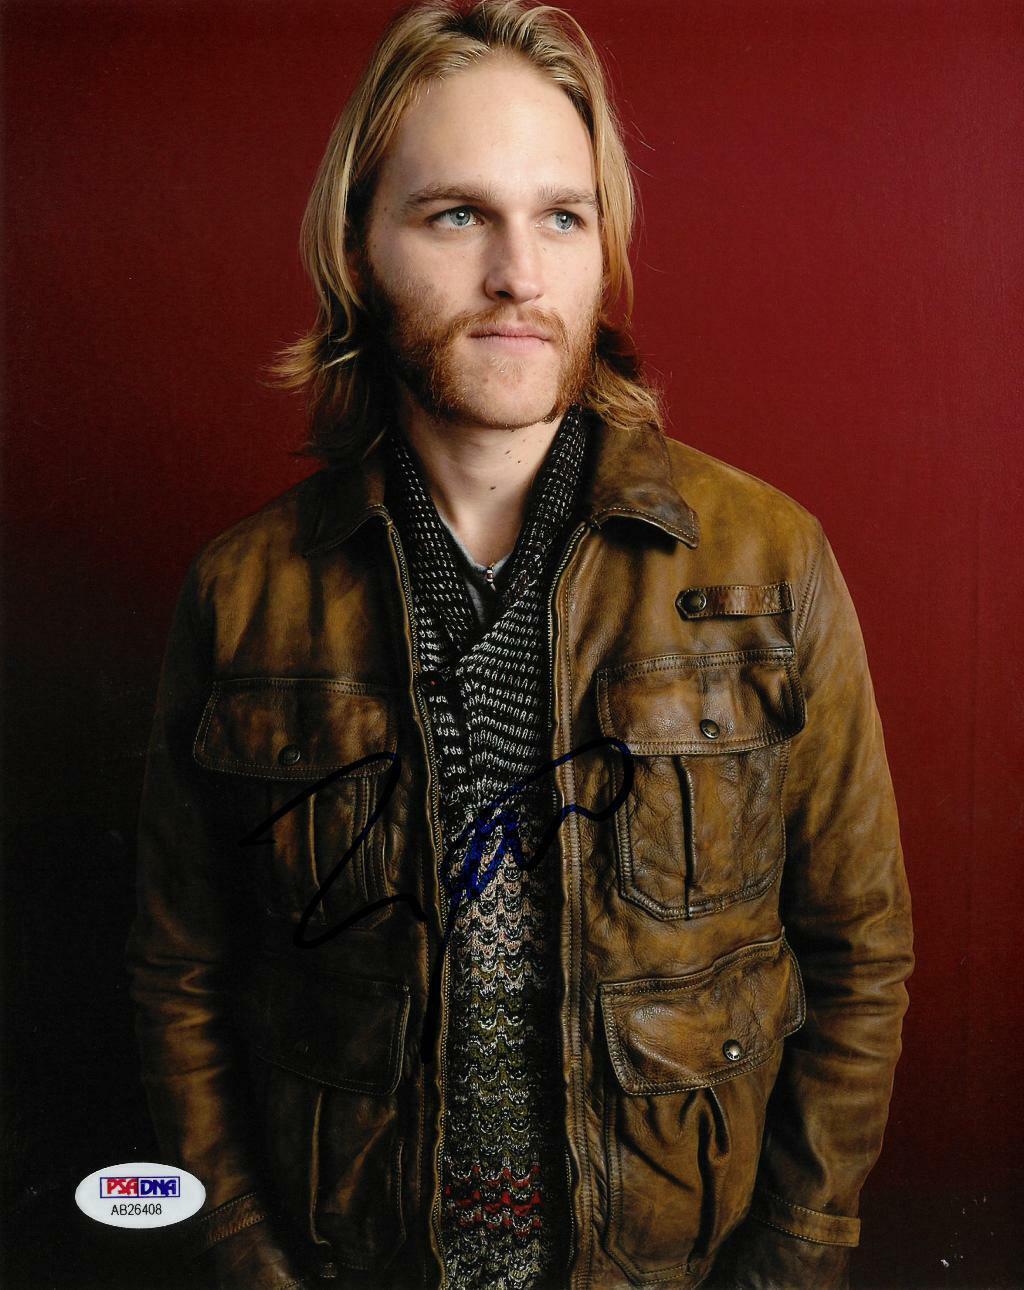 Wyatt Russell Signed Authentic Autographed 8x10 Photo Poster painting PSA/DNA #AB26408